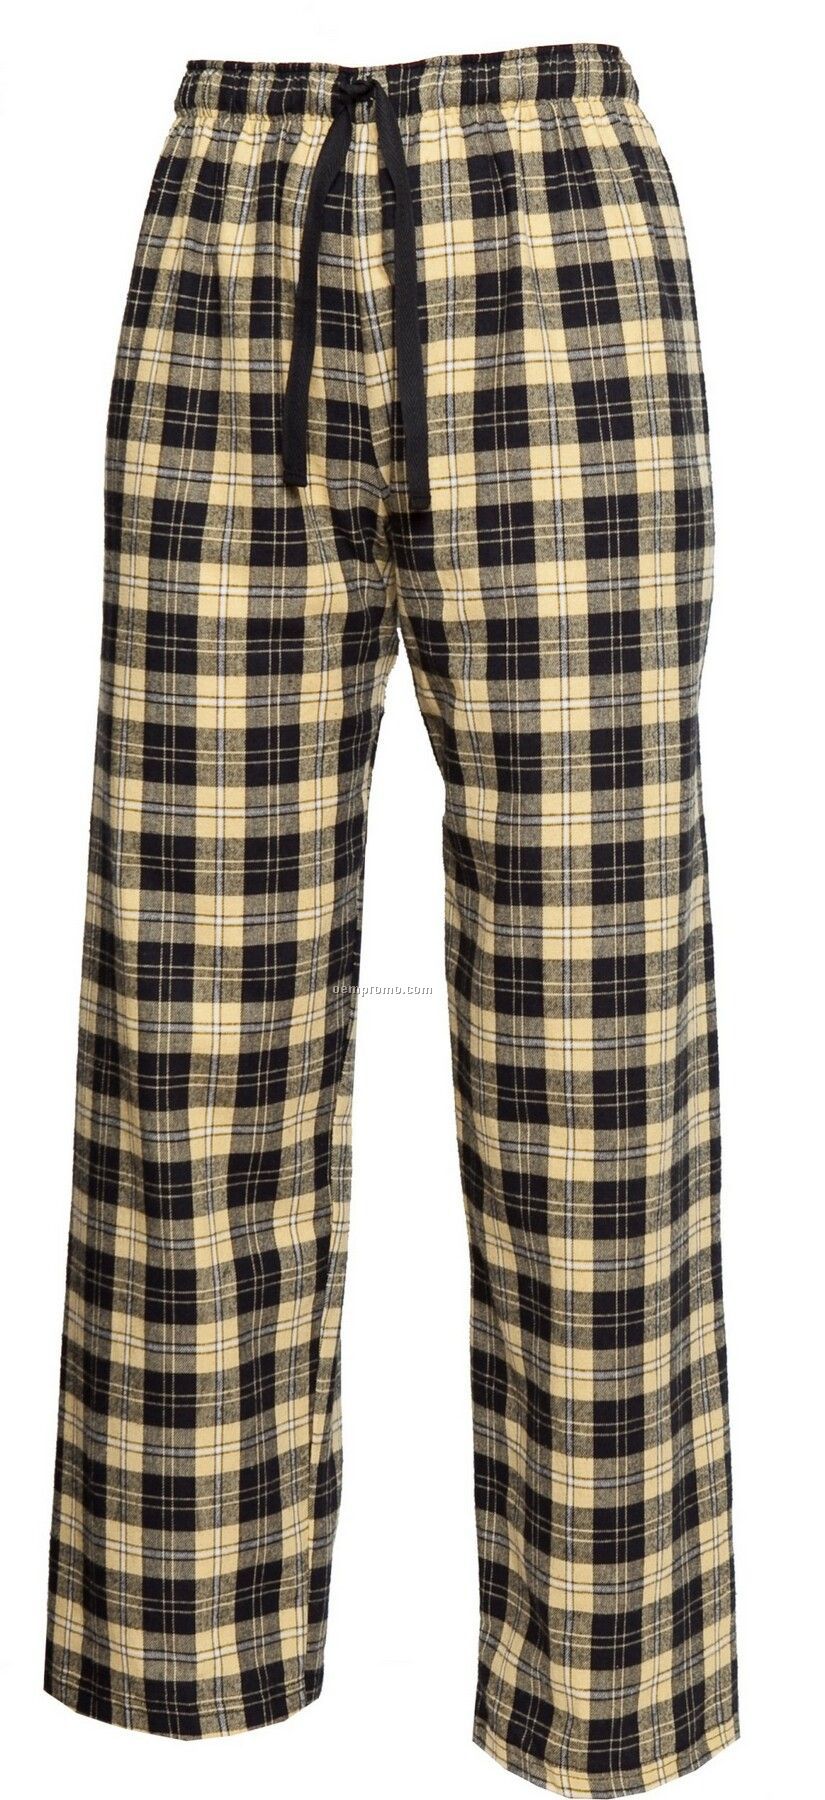 Youth Team Pride Flannel Pant In Vegas Gold & Black Plaid